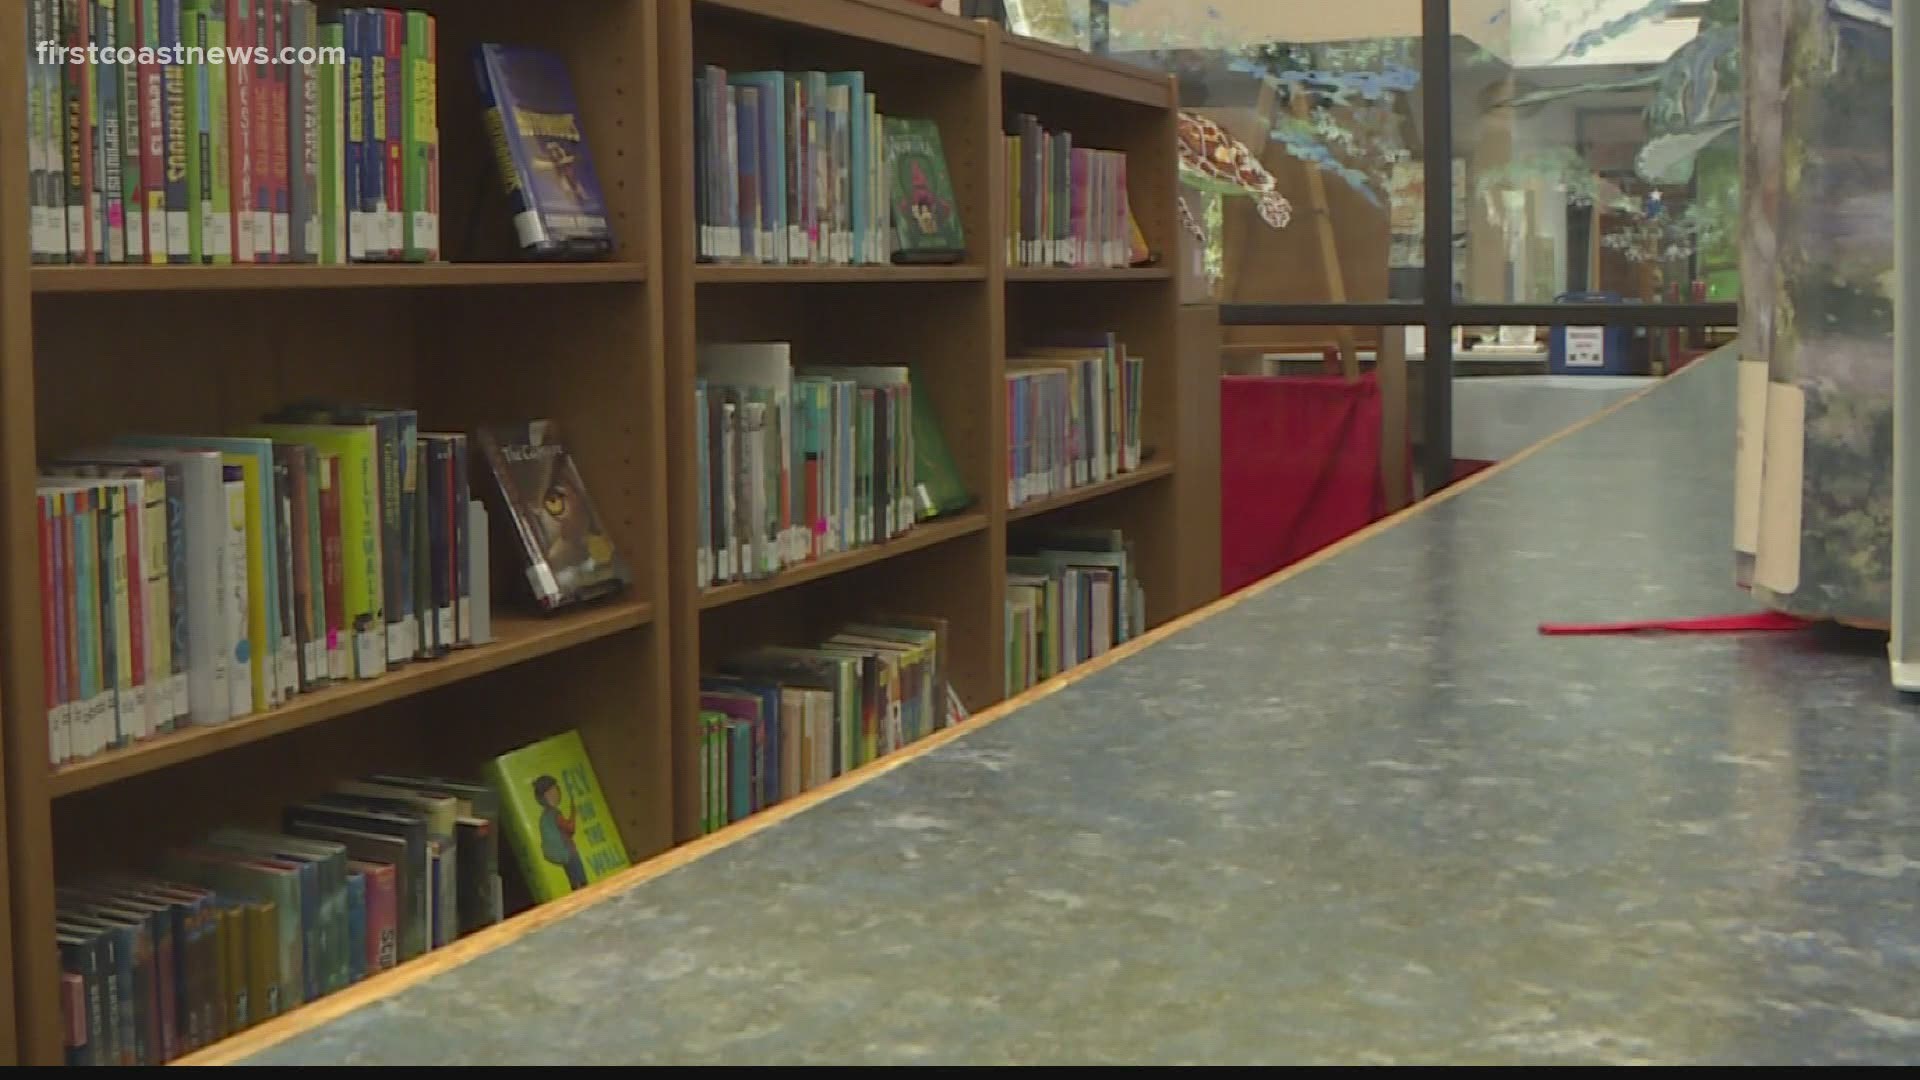 The company suggested to take over the library already manages two libraries in Florida.